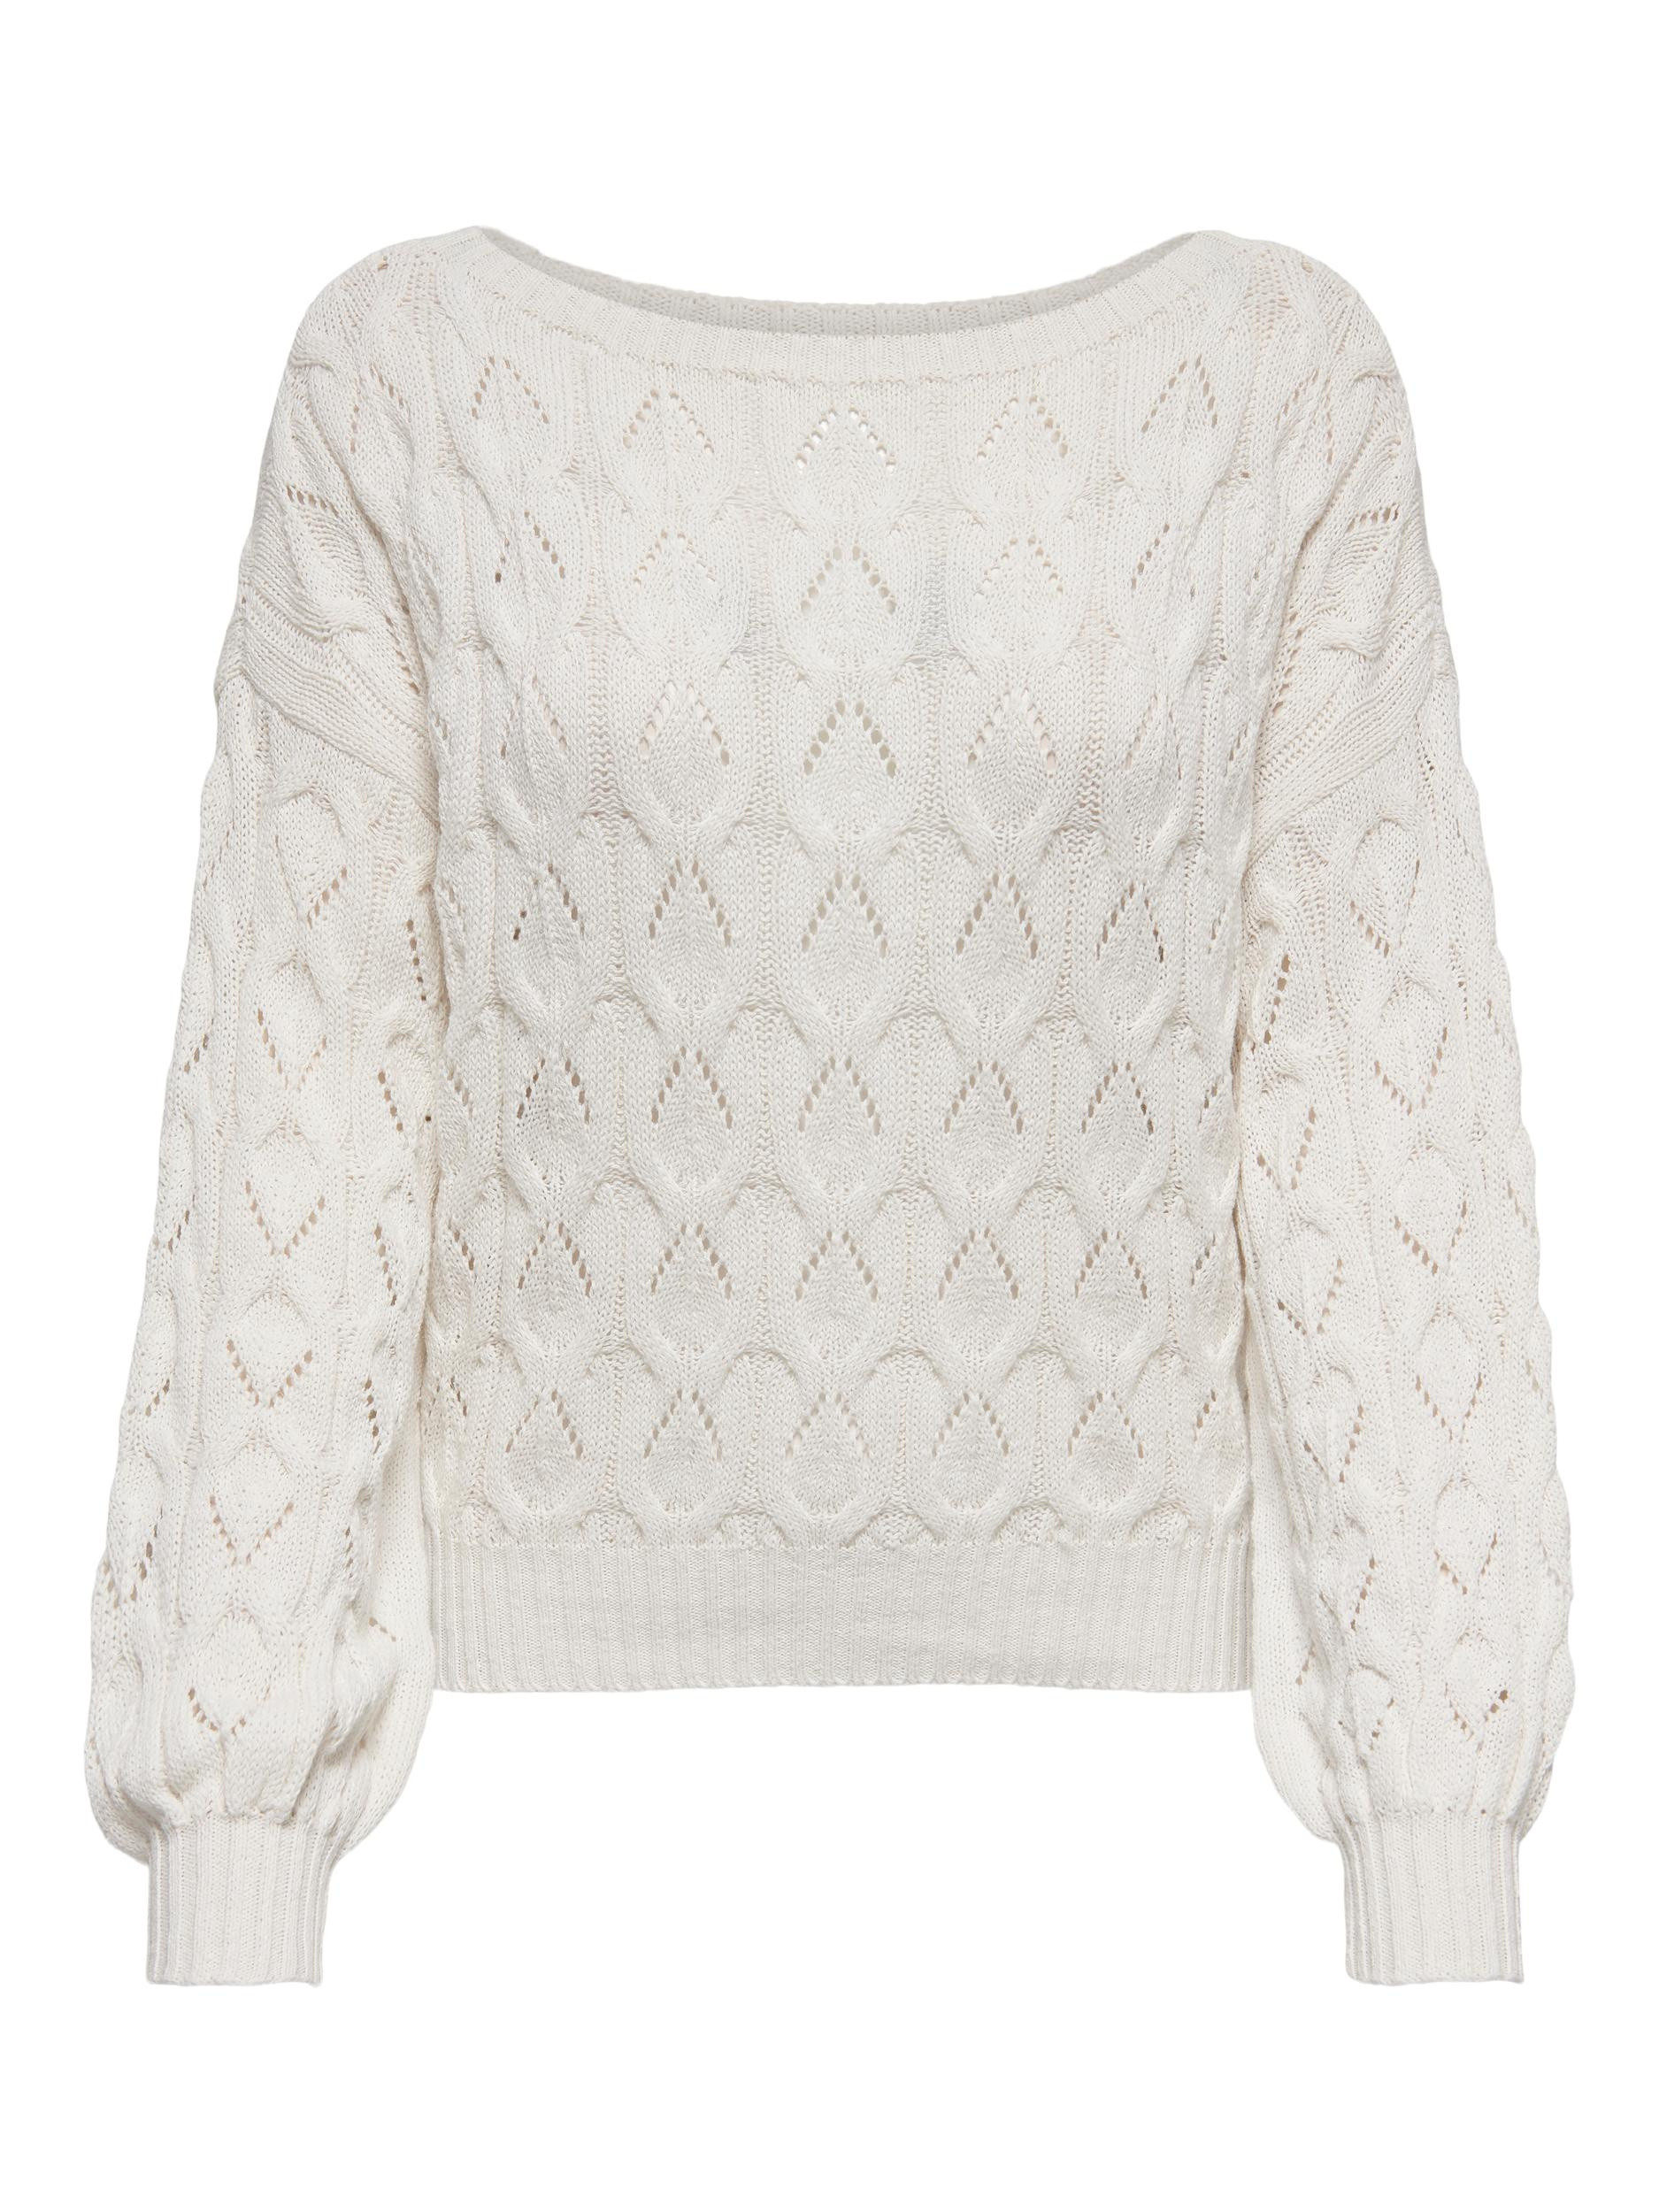 Only - Boat neck pullover with pointelle detail, White, large image number 0